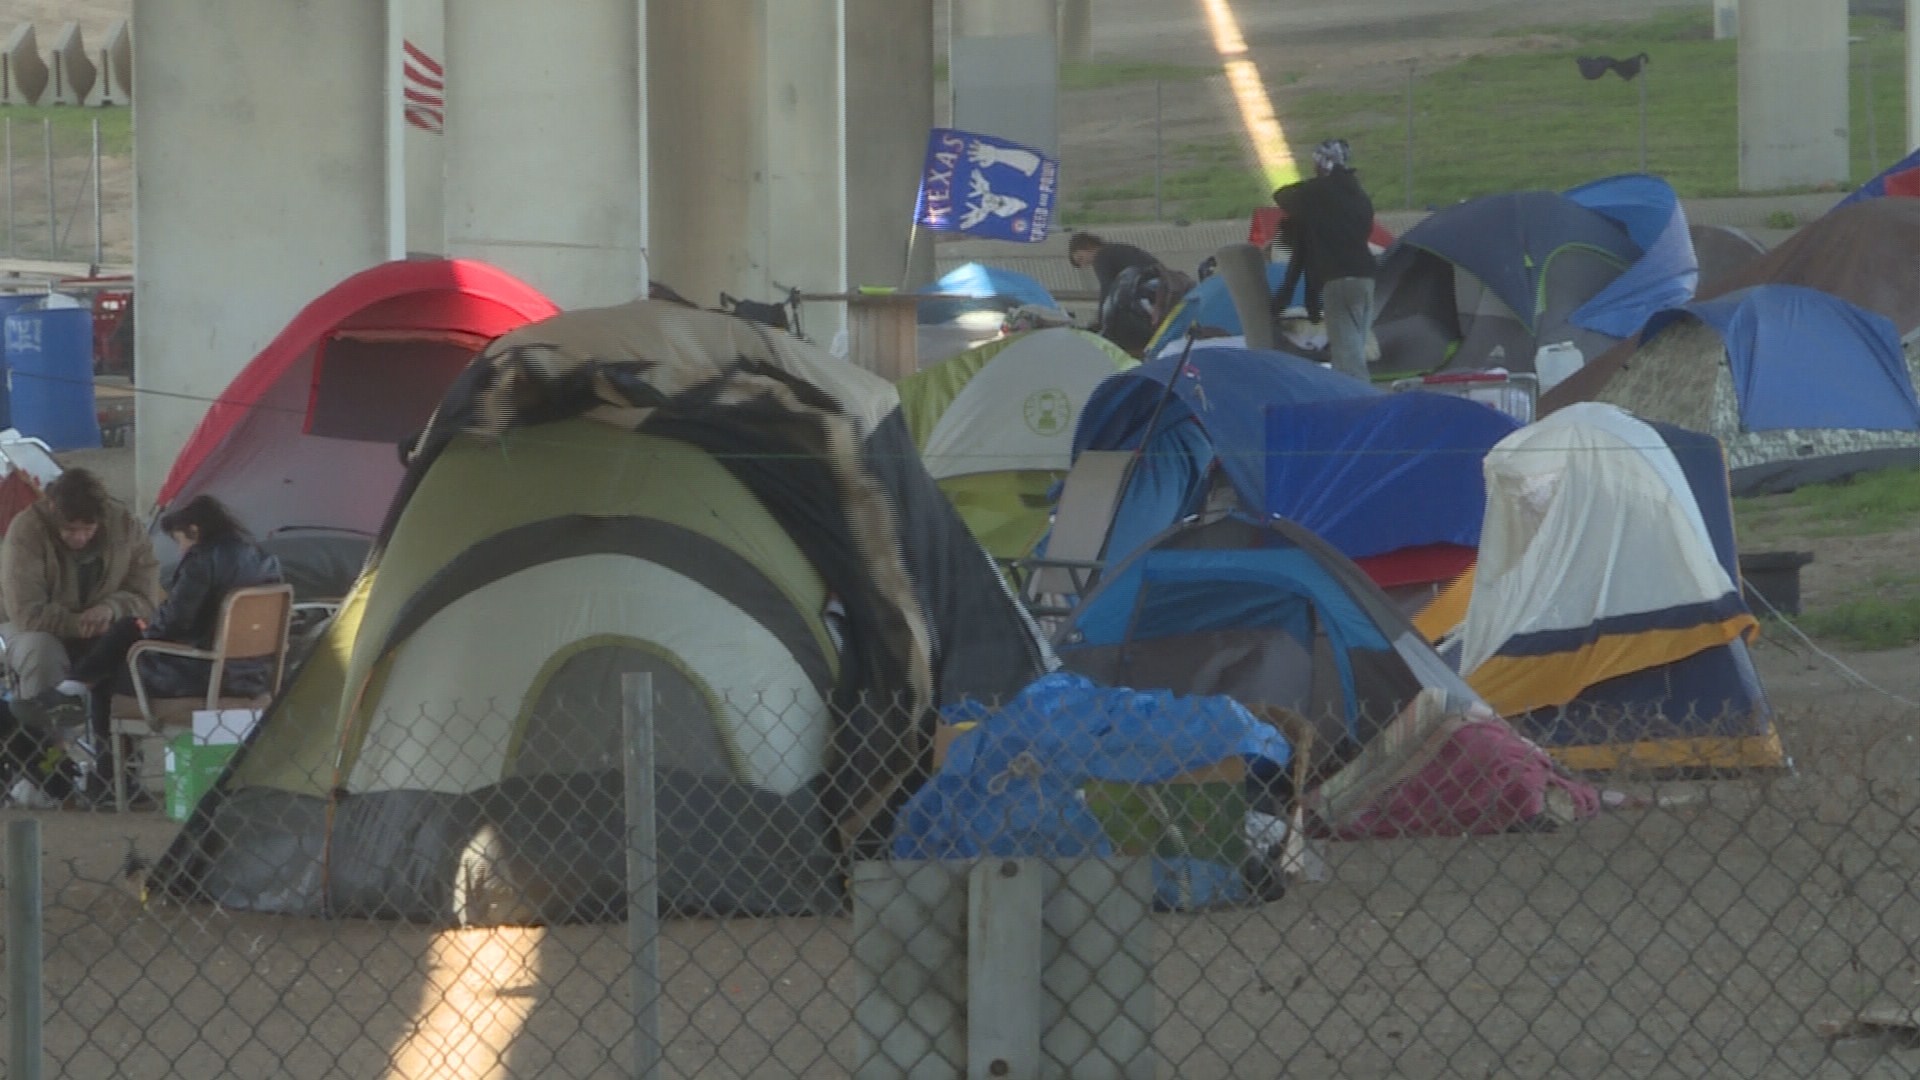 Dallas Eradicating Over 200 Homeless People From Tent City | DontComply.com